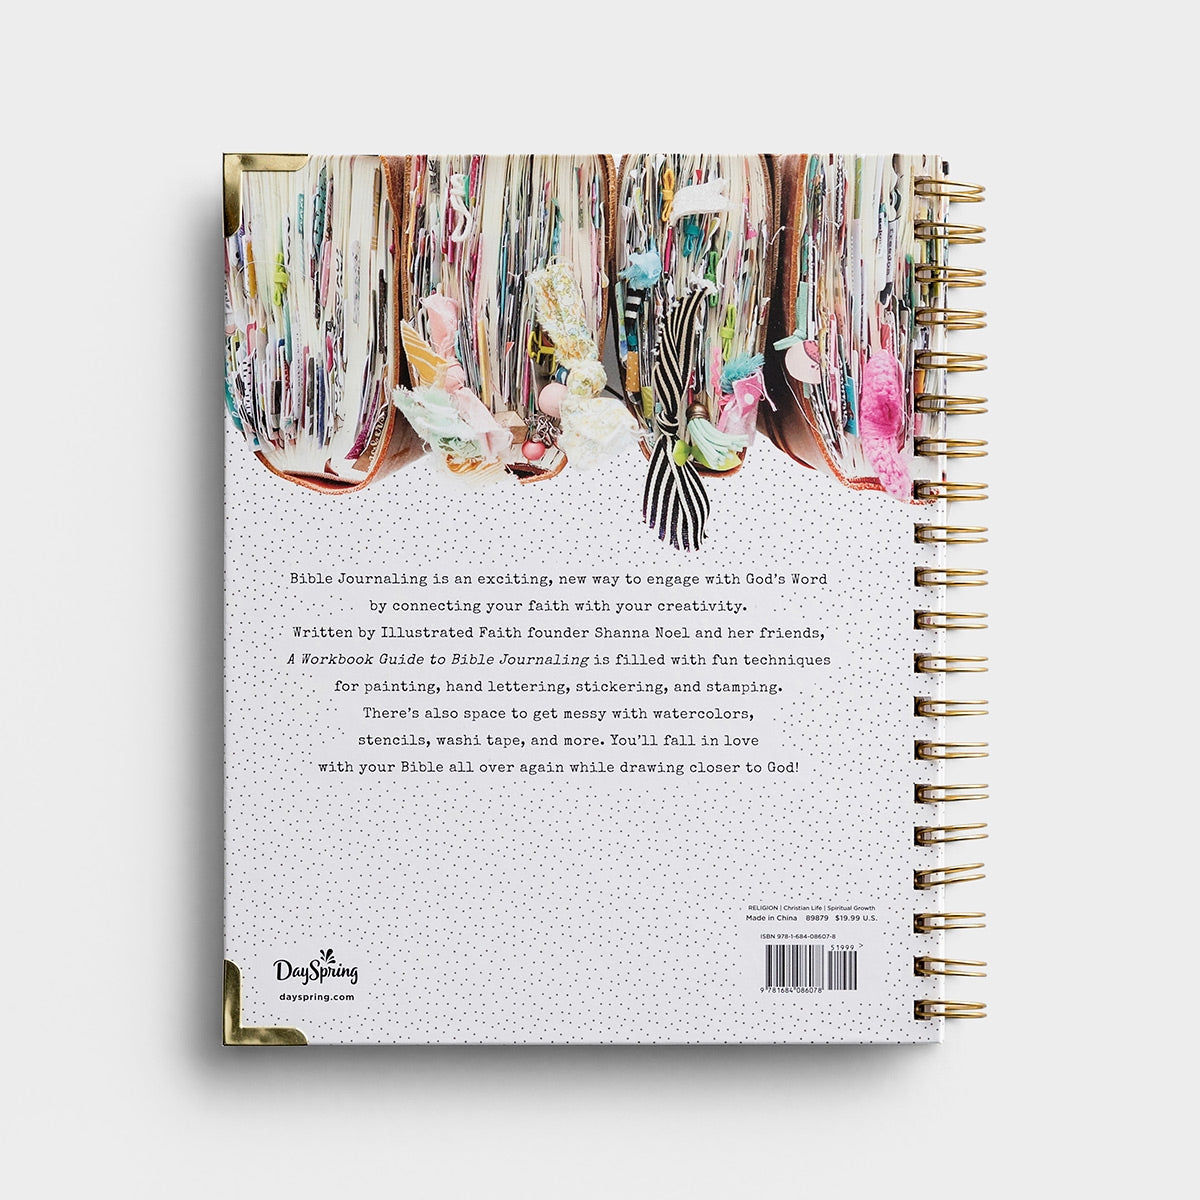 A Workbook Guide to Bible Journaling back cover.